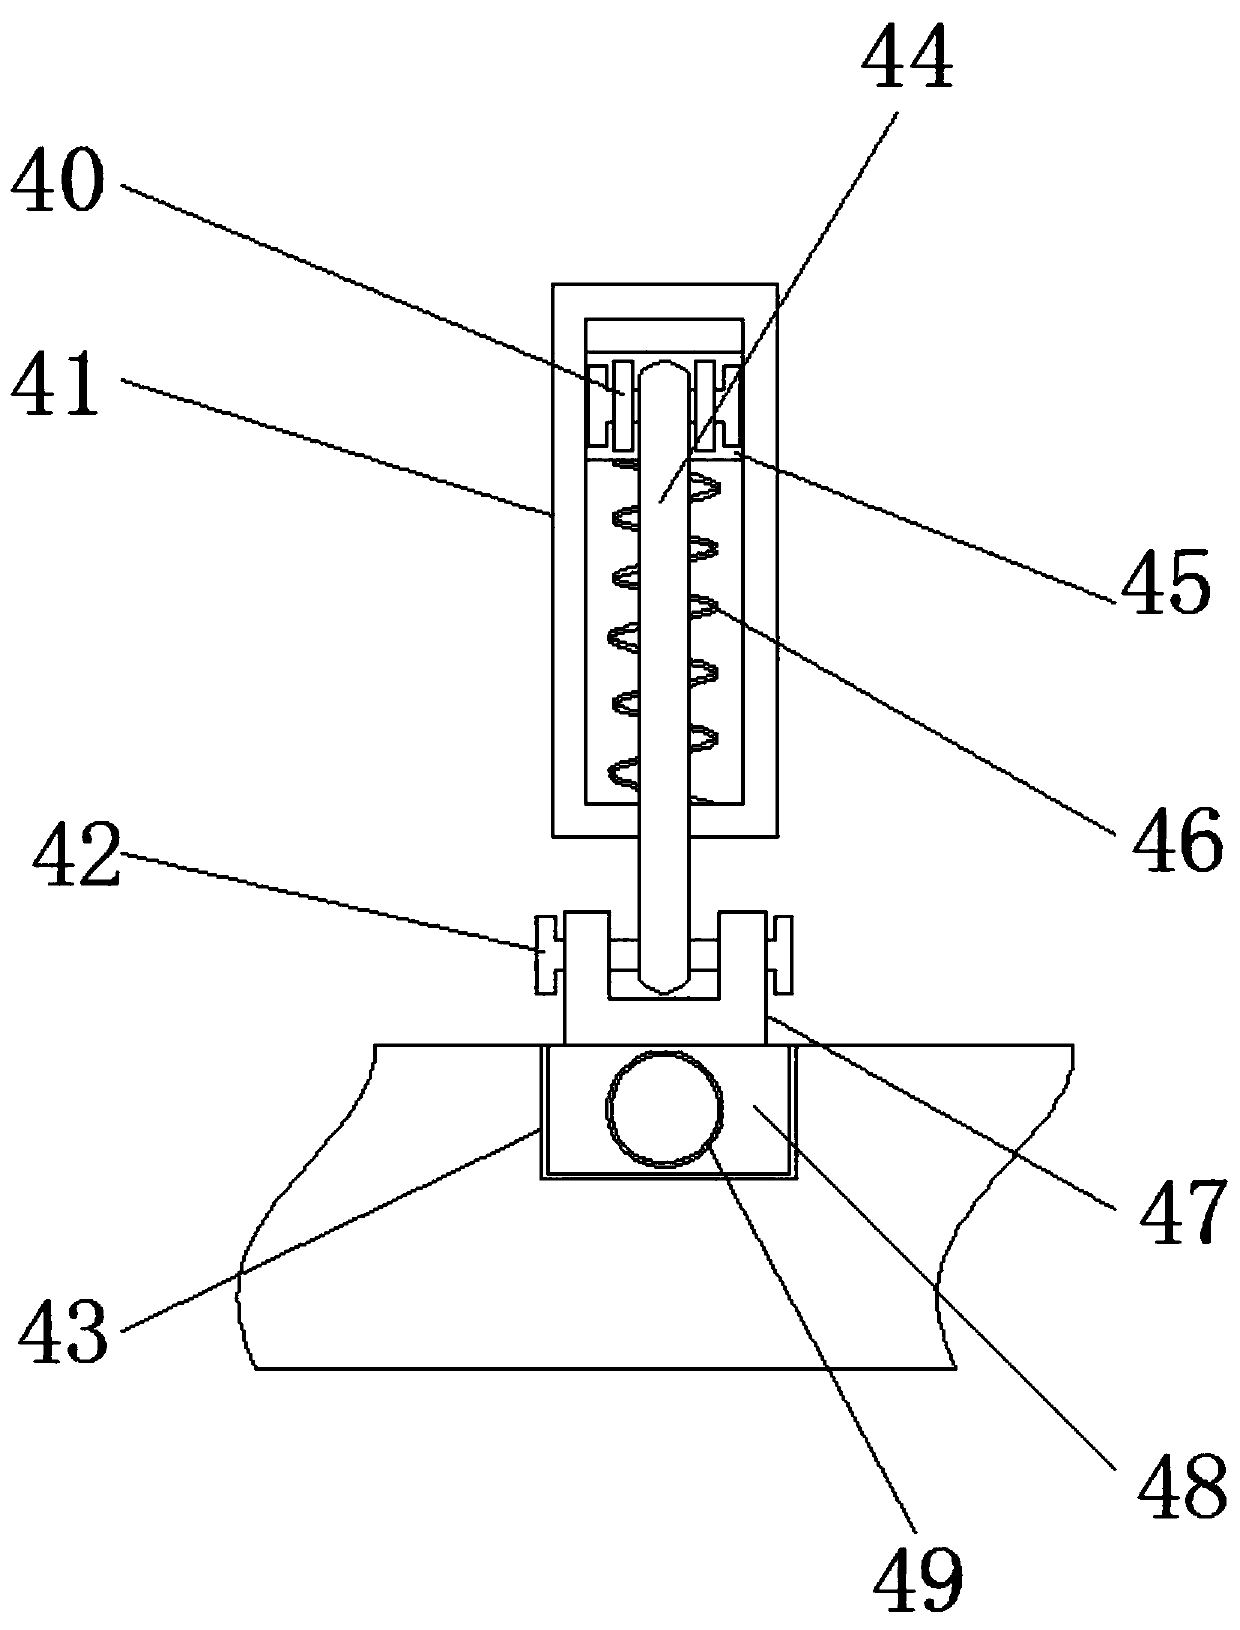 Anti-leakage natural gas closing device and using method thereof